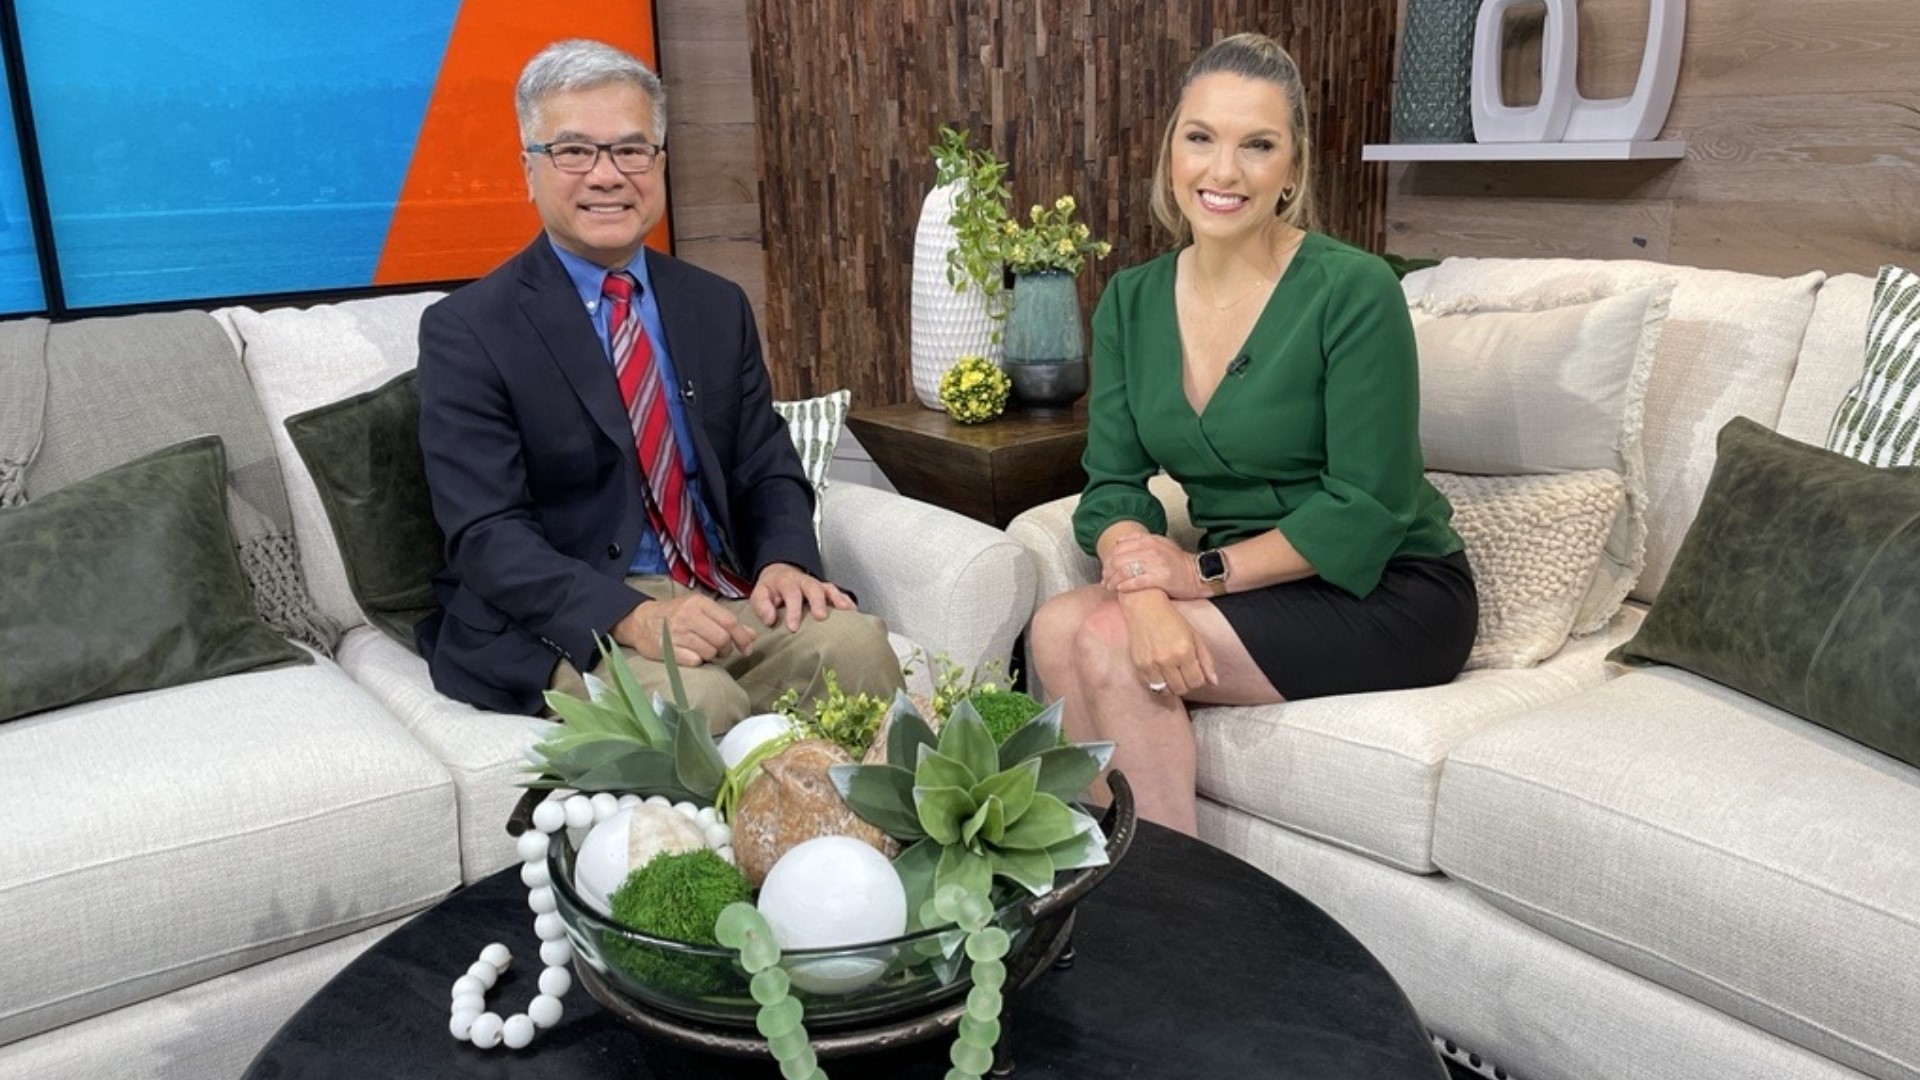 Former Washington Governor Gary Locke discusses the August 2 primary and the issues driving voters to the polls. #newdaynw